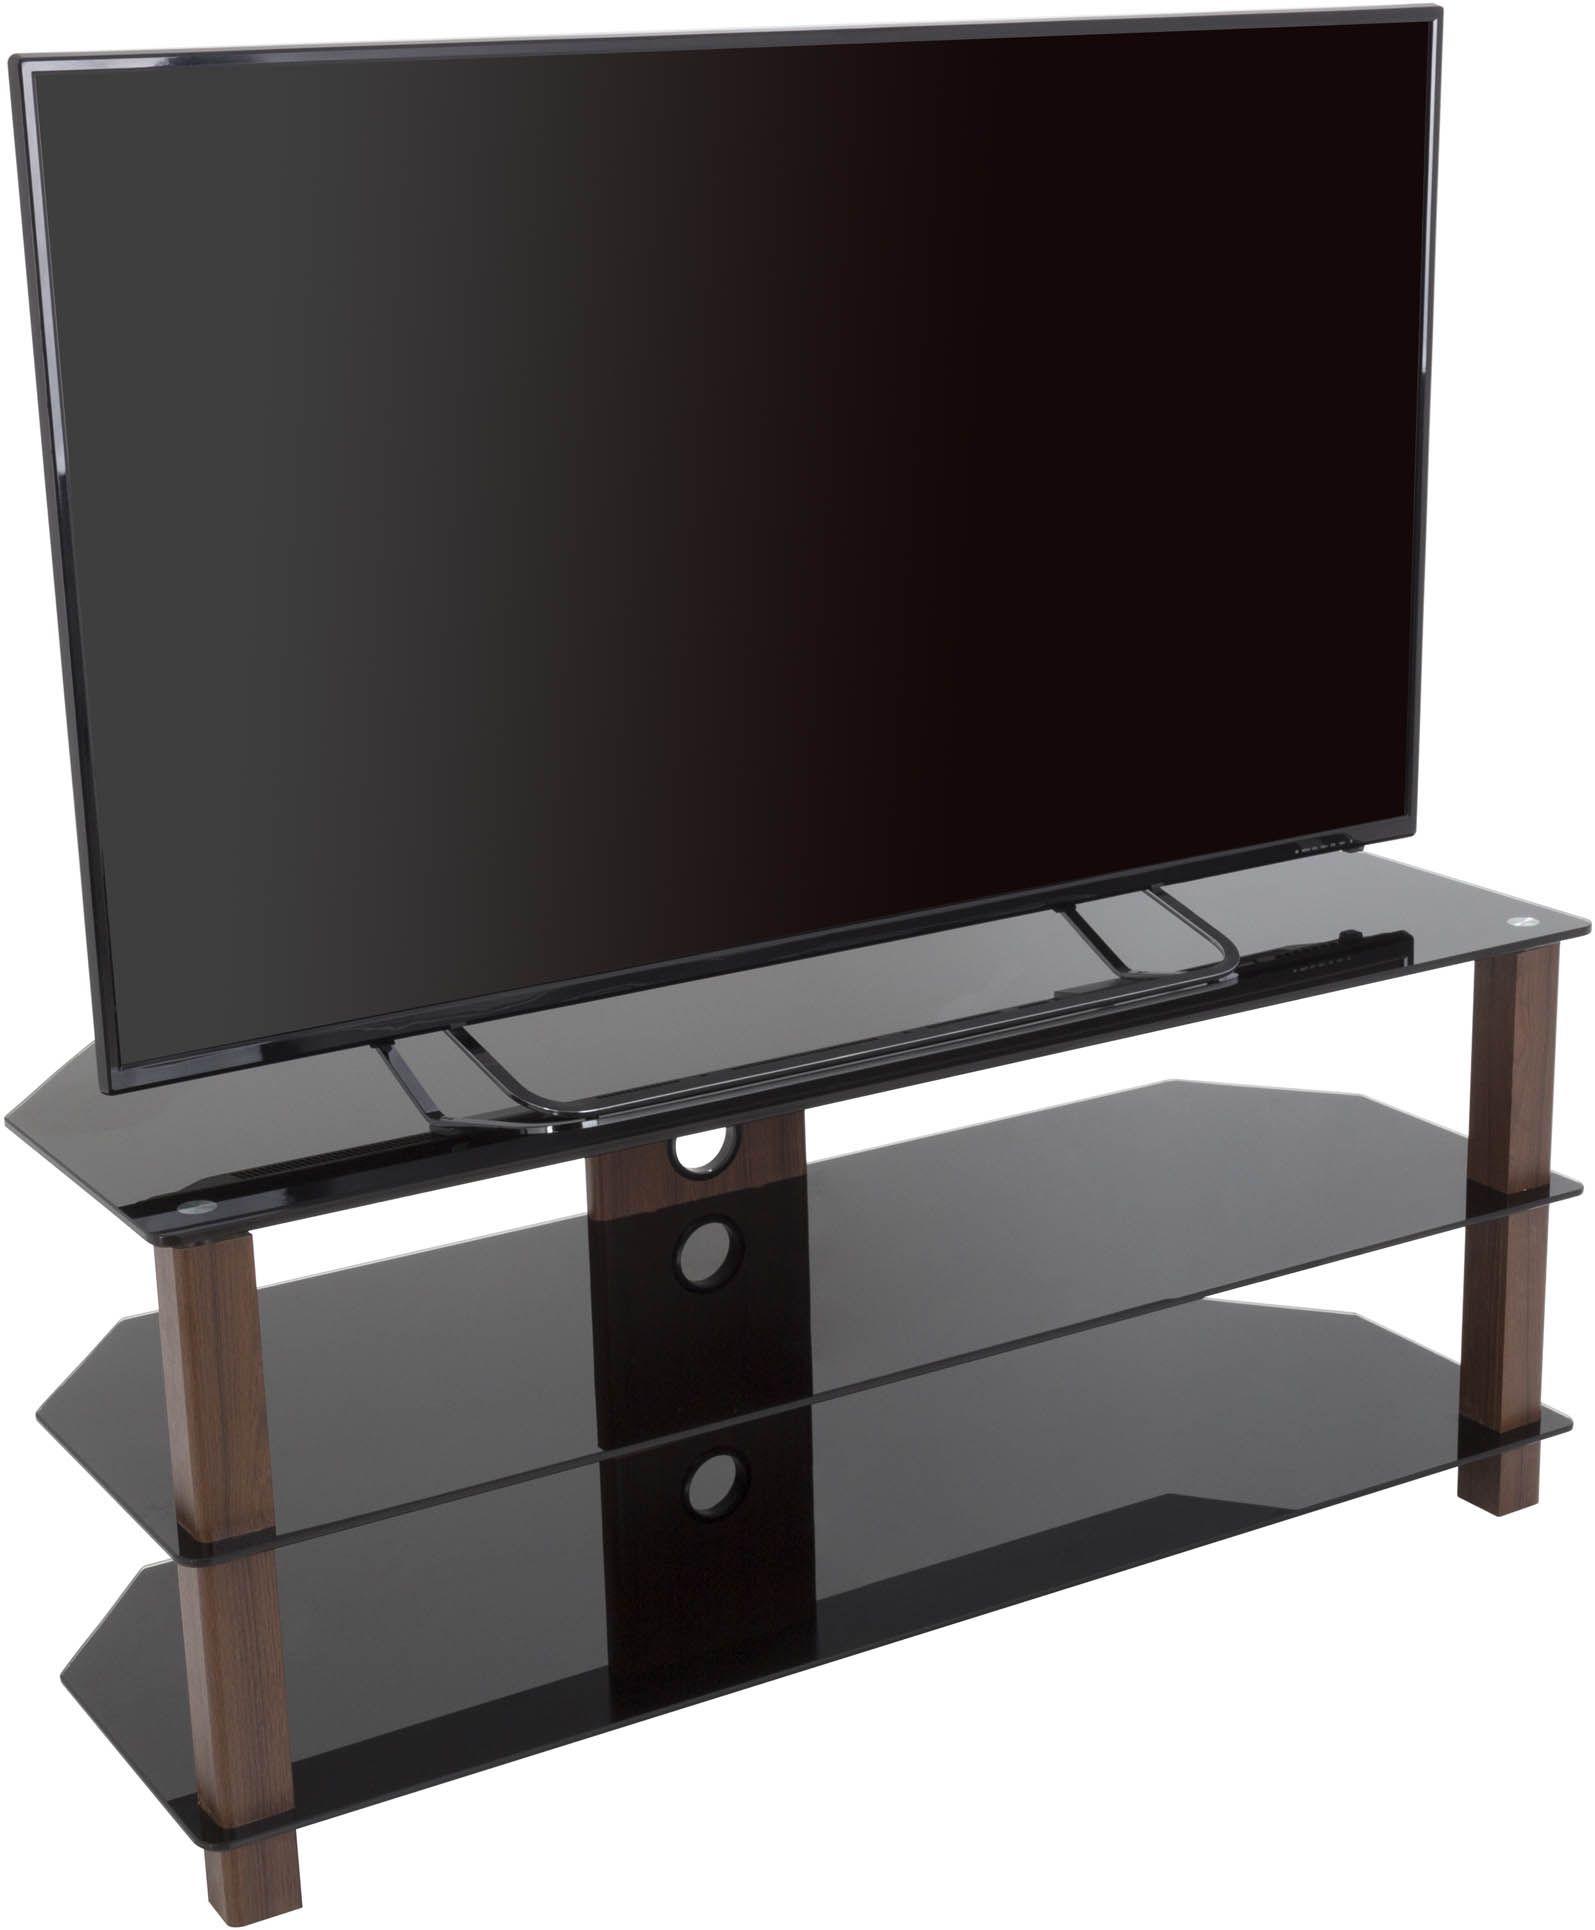 Avf Fs1250valwb3 Wg Series Glass Corner Tv Stand For Tvs Throughout Black Corner Tv Stands For Tvs Up To  (View 8 of 15)